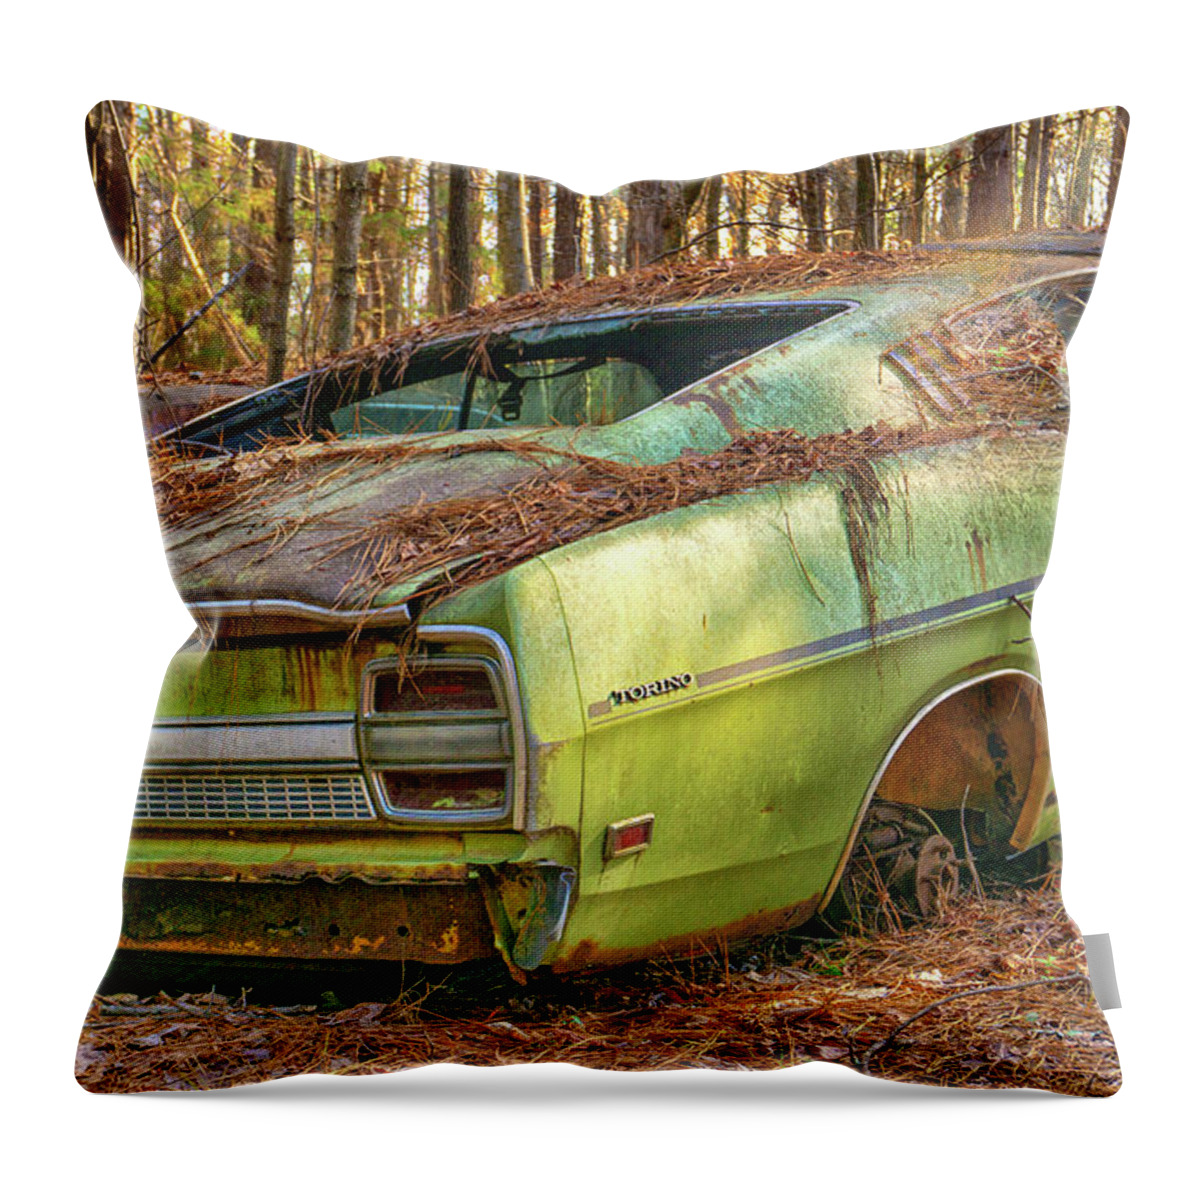 Torino Throw Pillow featuring the photograph Ford Torino by Dennis Dugan